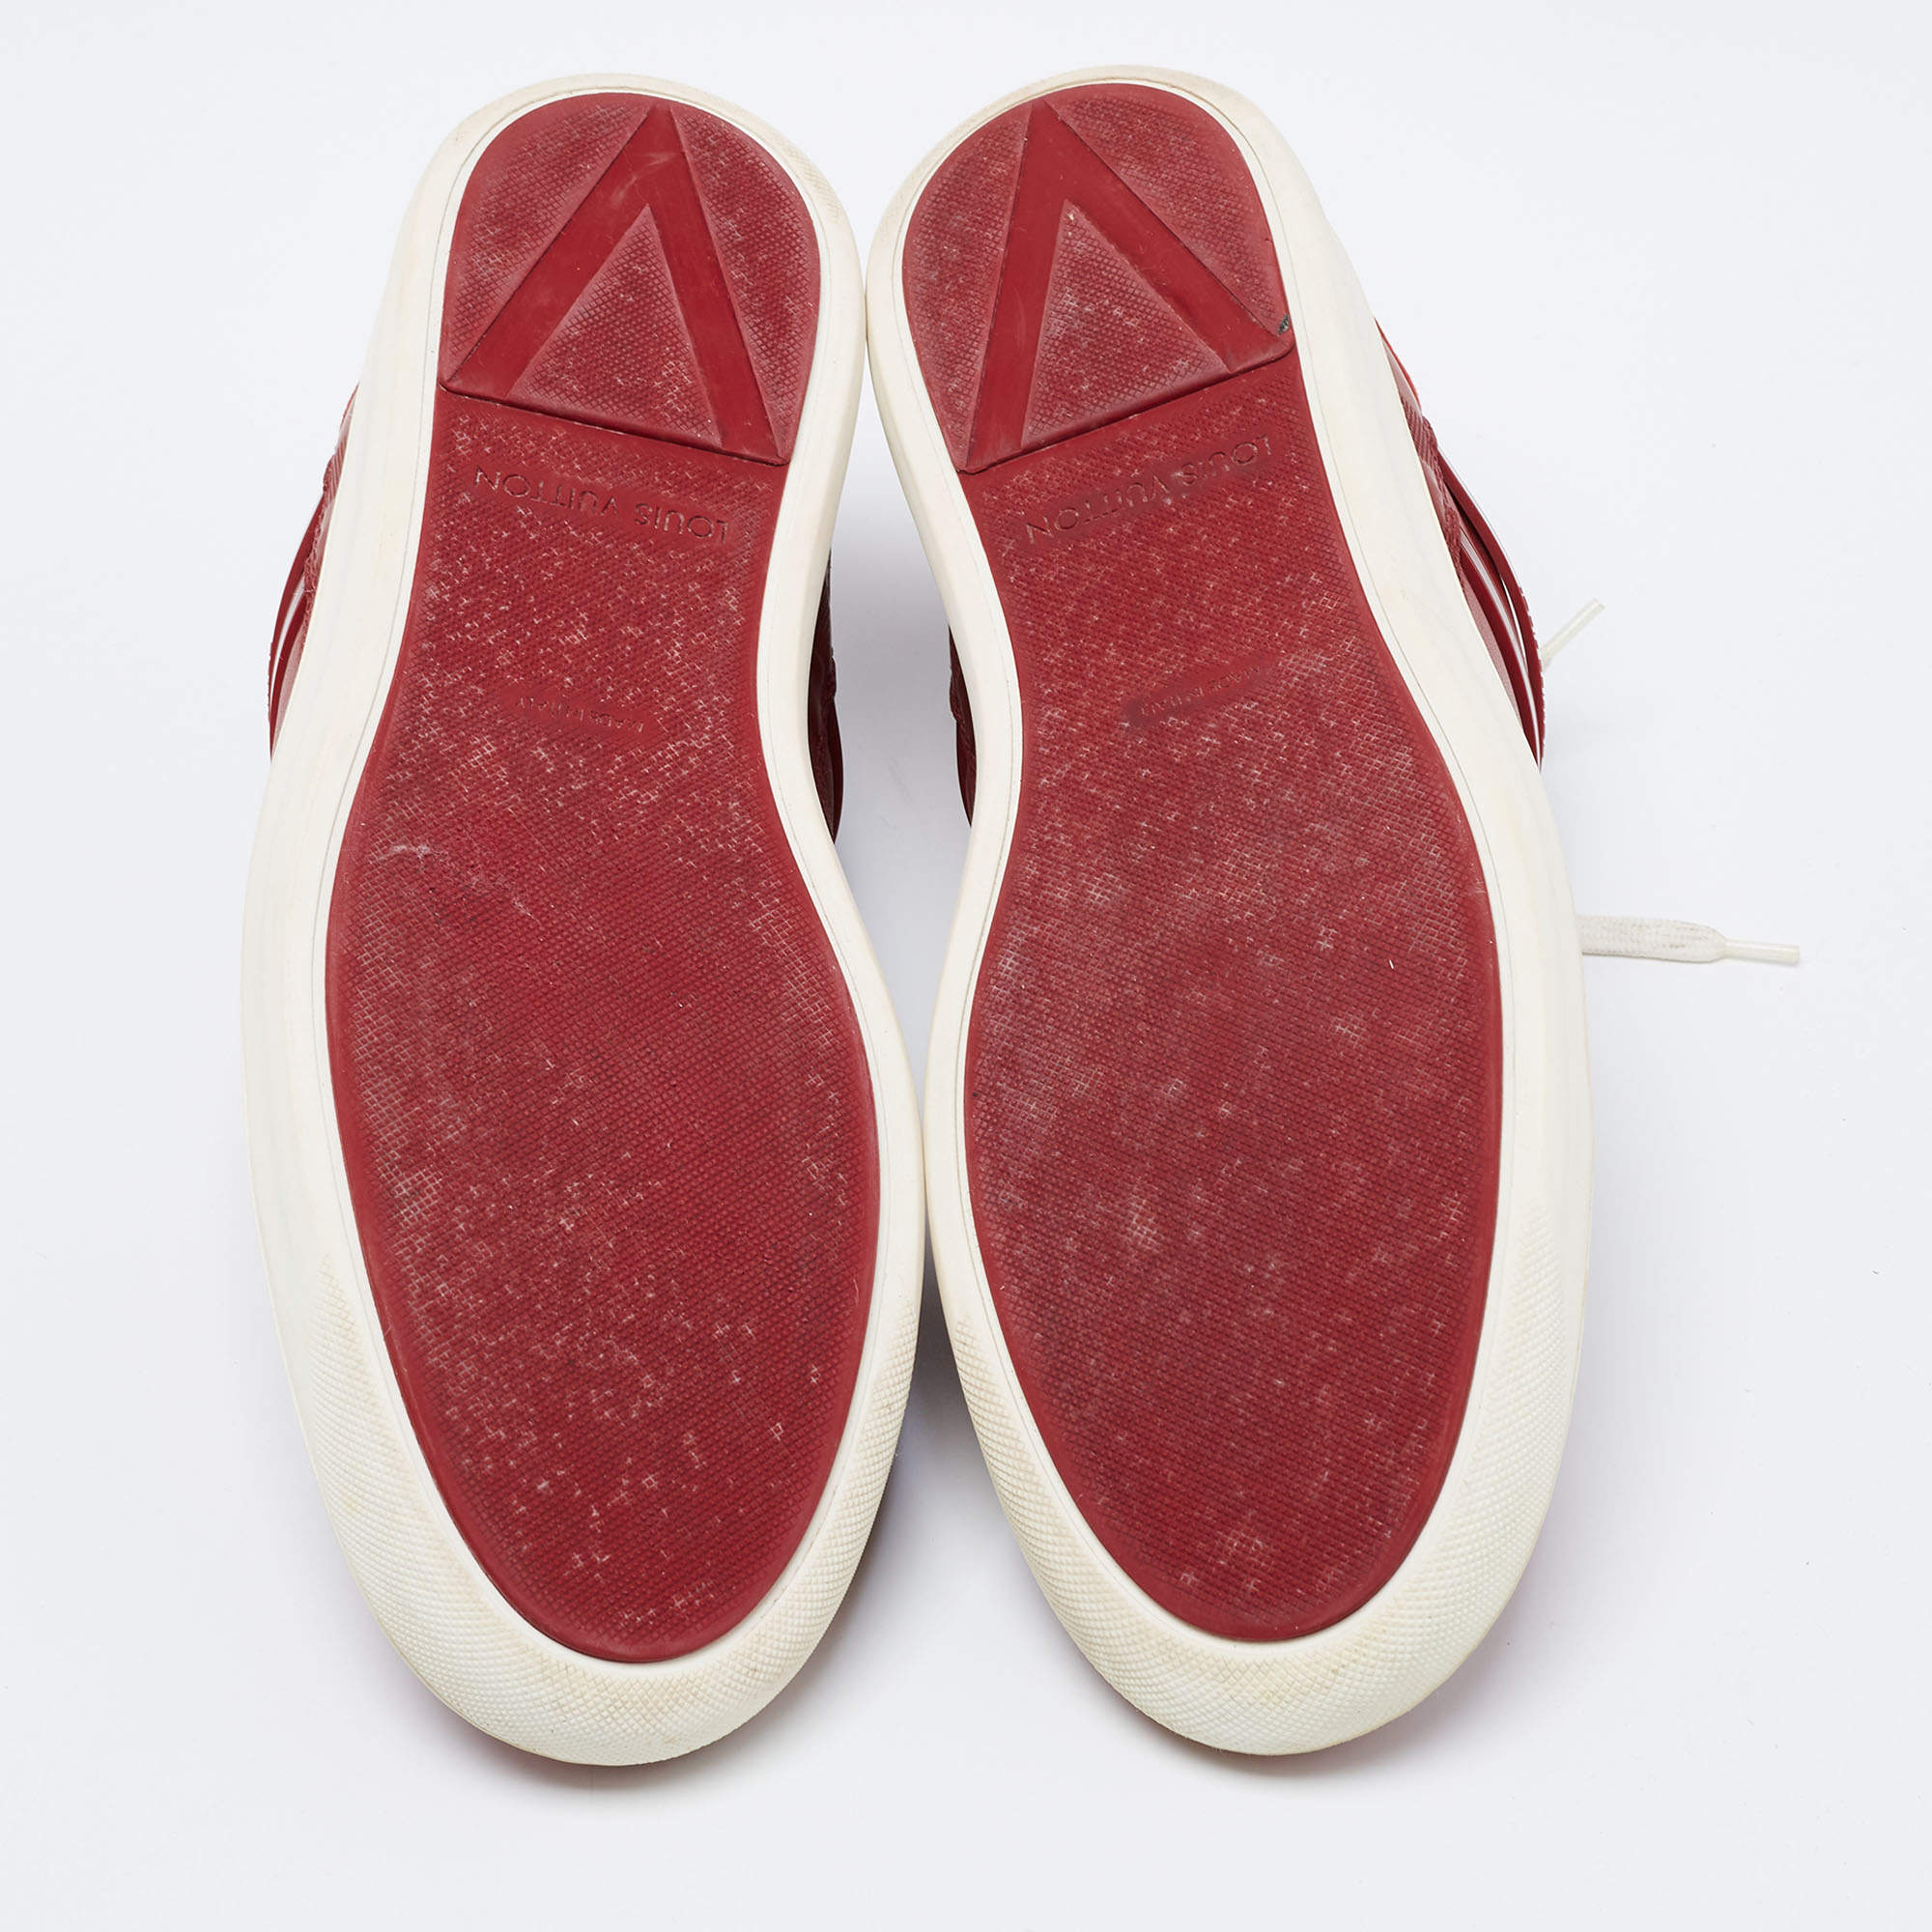 Louis Vuitton Red Leather and Suede Genesis Low-Top Sneakers Size 42.5 Louis  Vuitton